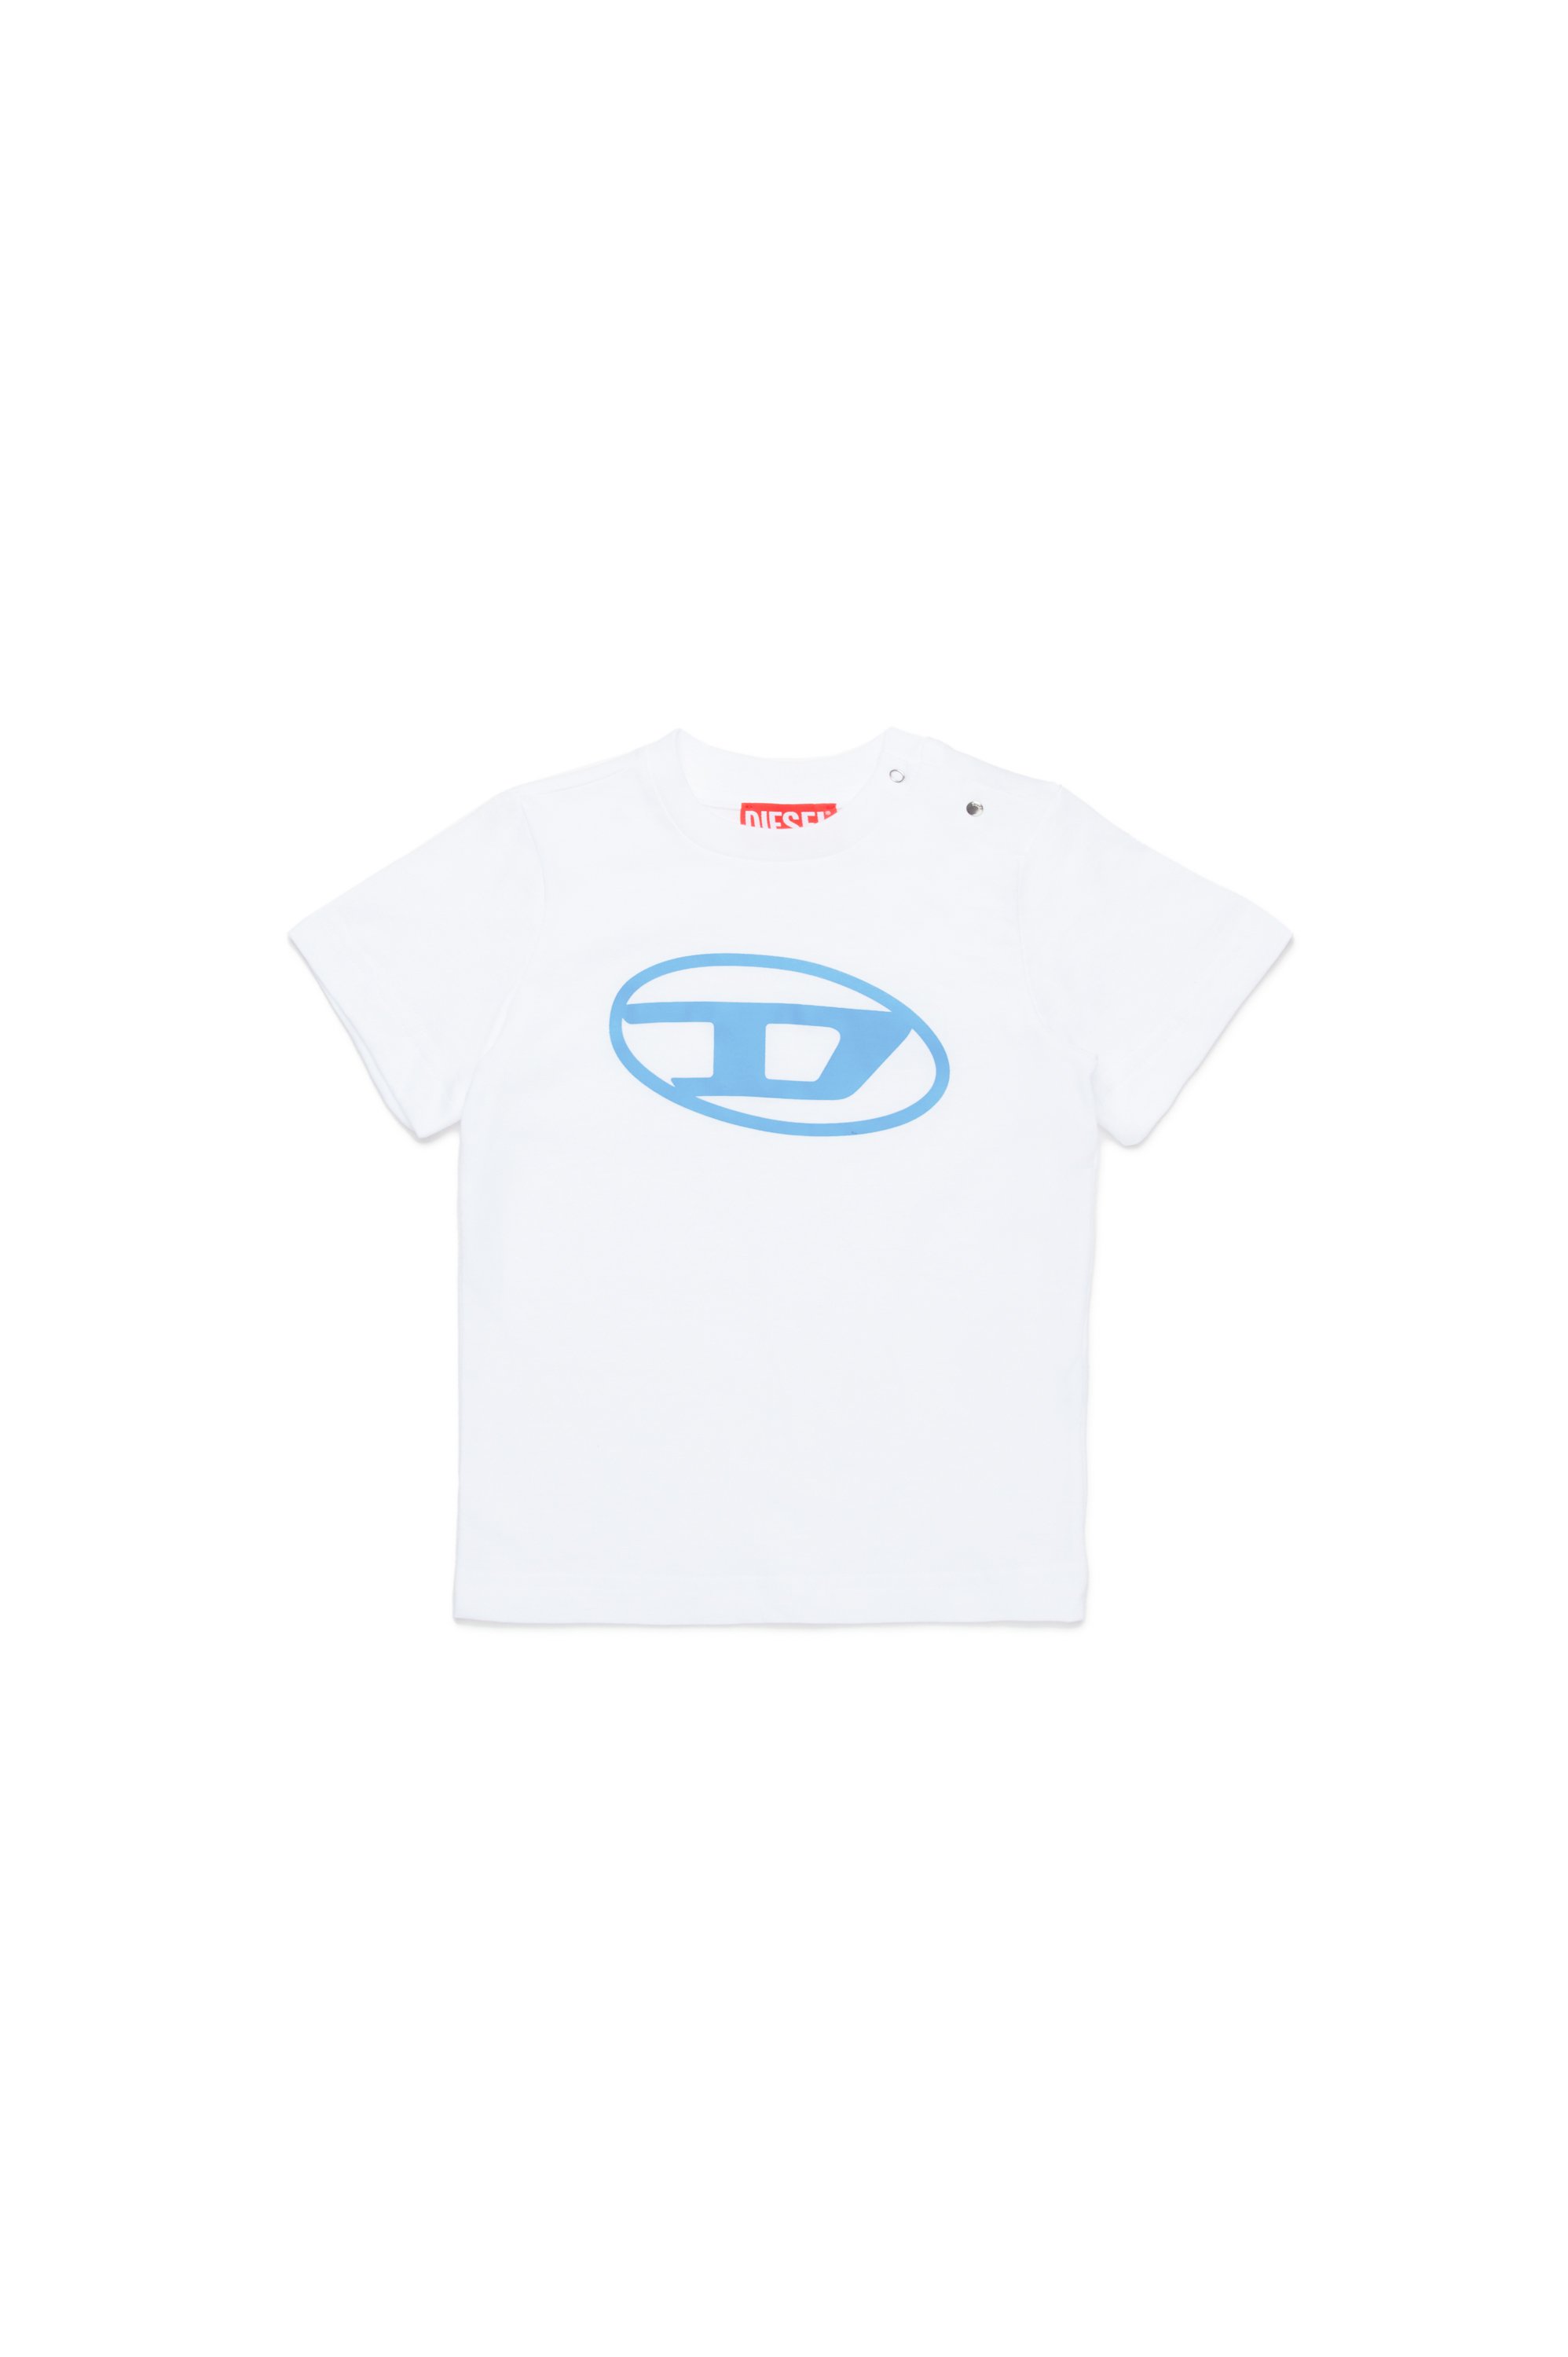 Diesel - TCERB, Unisex T-shirt with Oval D logo in White - Image 1